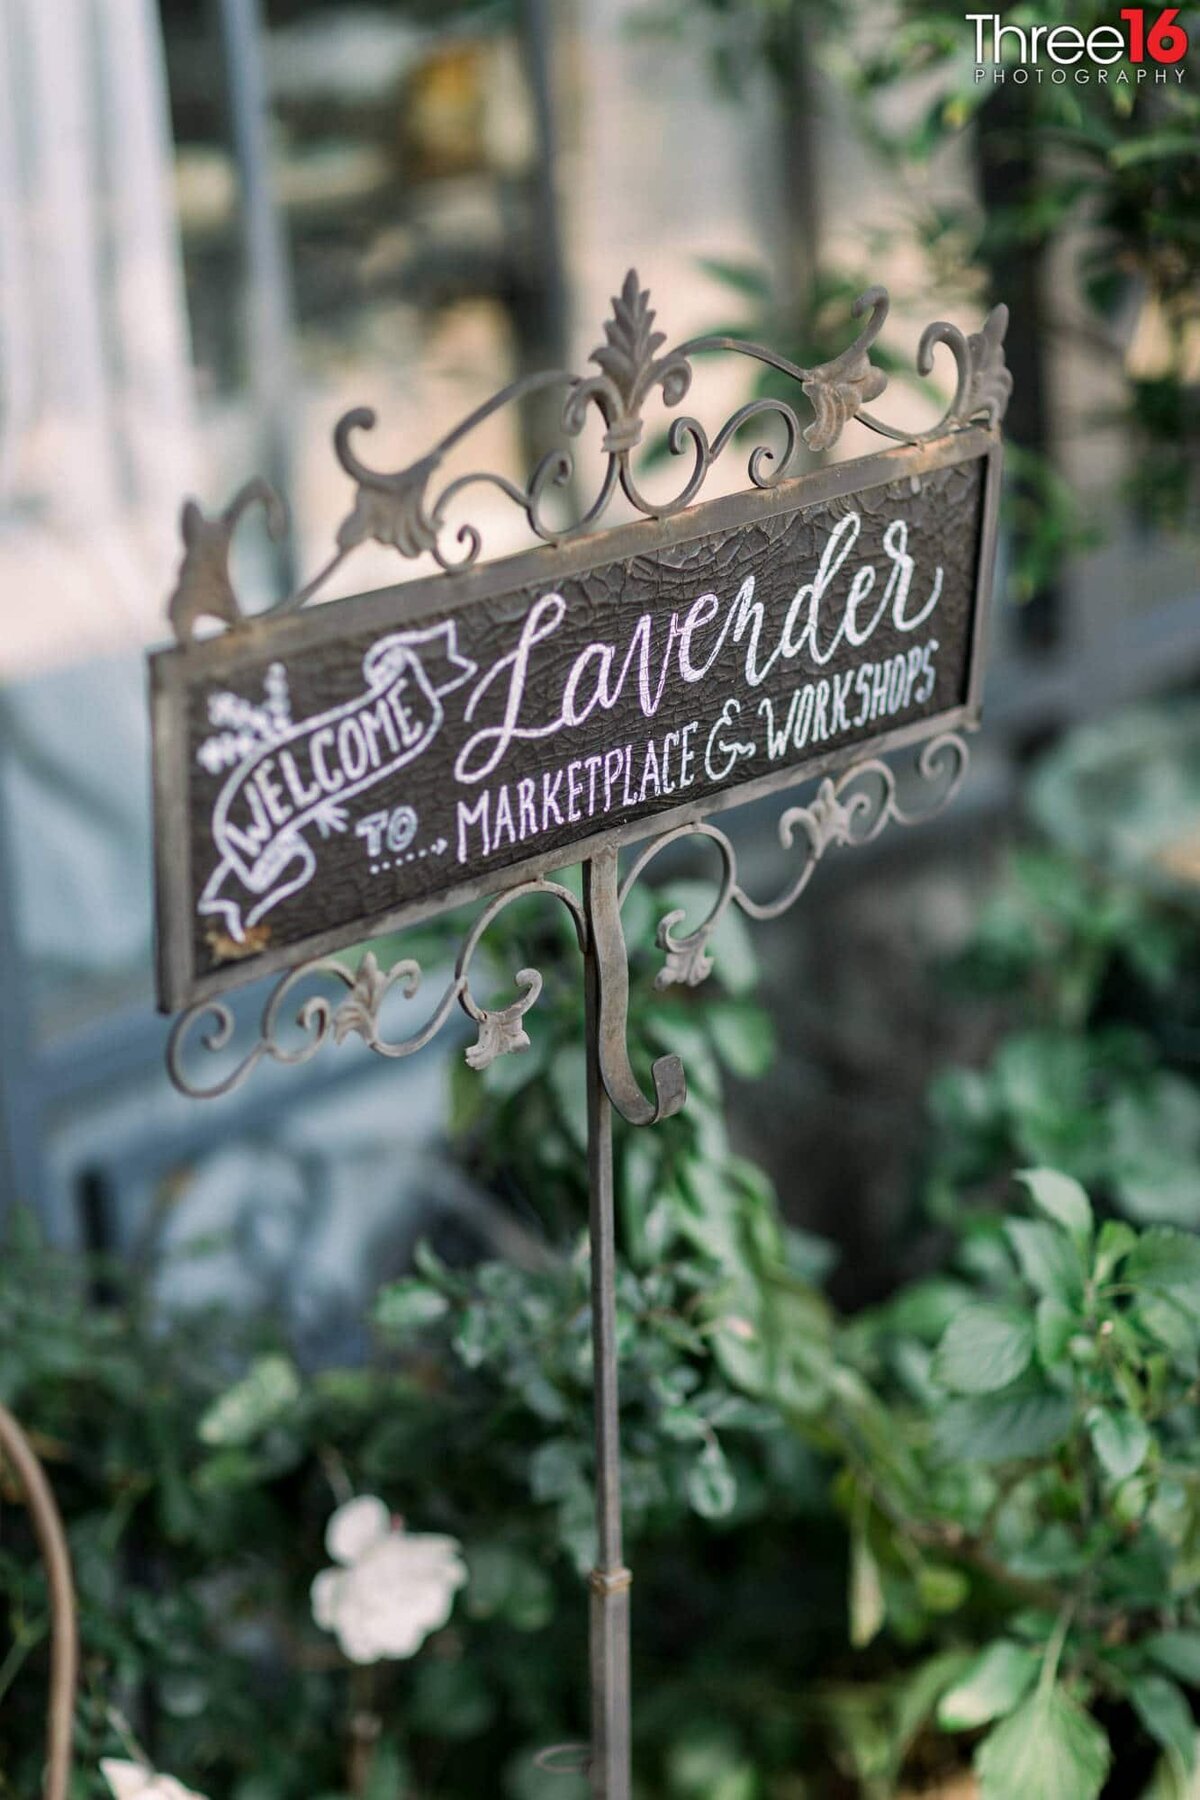 Welcoming sign to the Lavender Marketplace & Workshops wedding venue